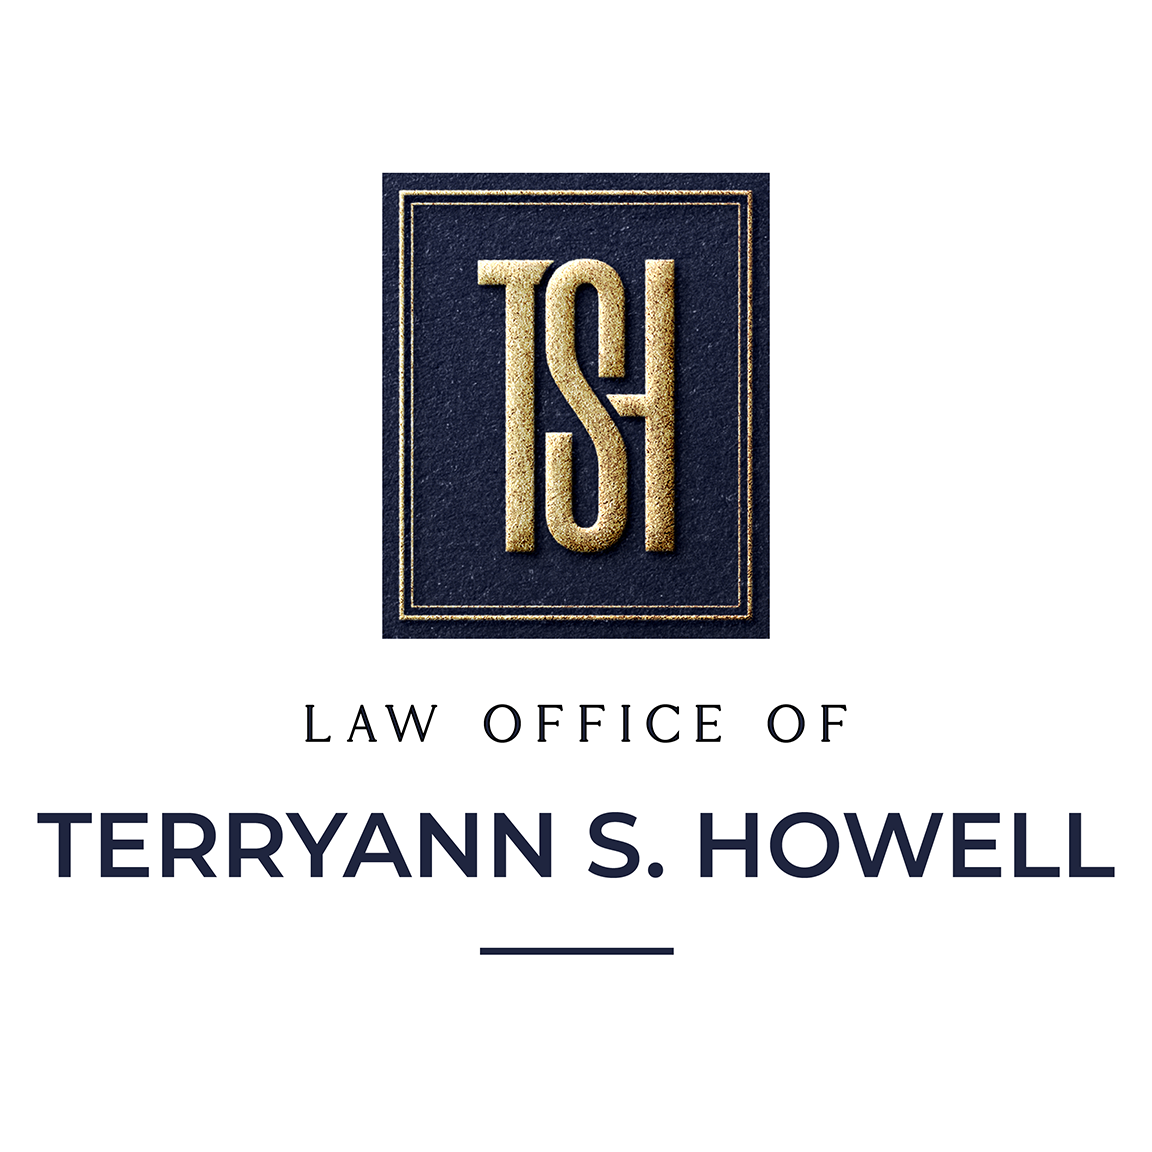 The Law Office of TerryAnn S. Howell